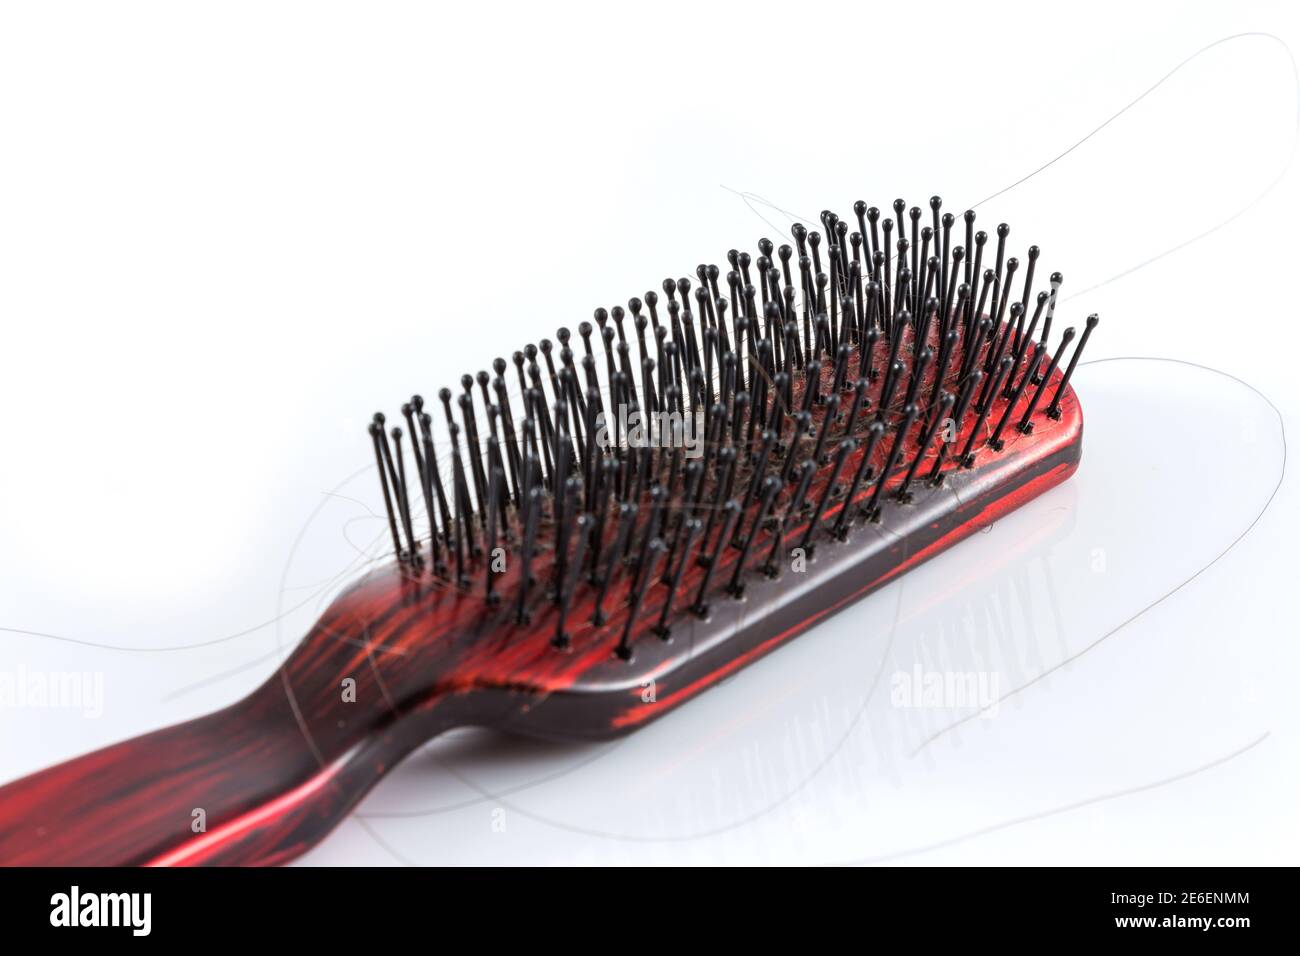 Comb and hair on white background Stock Photo